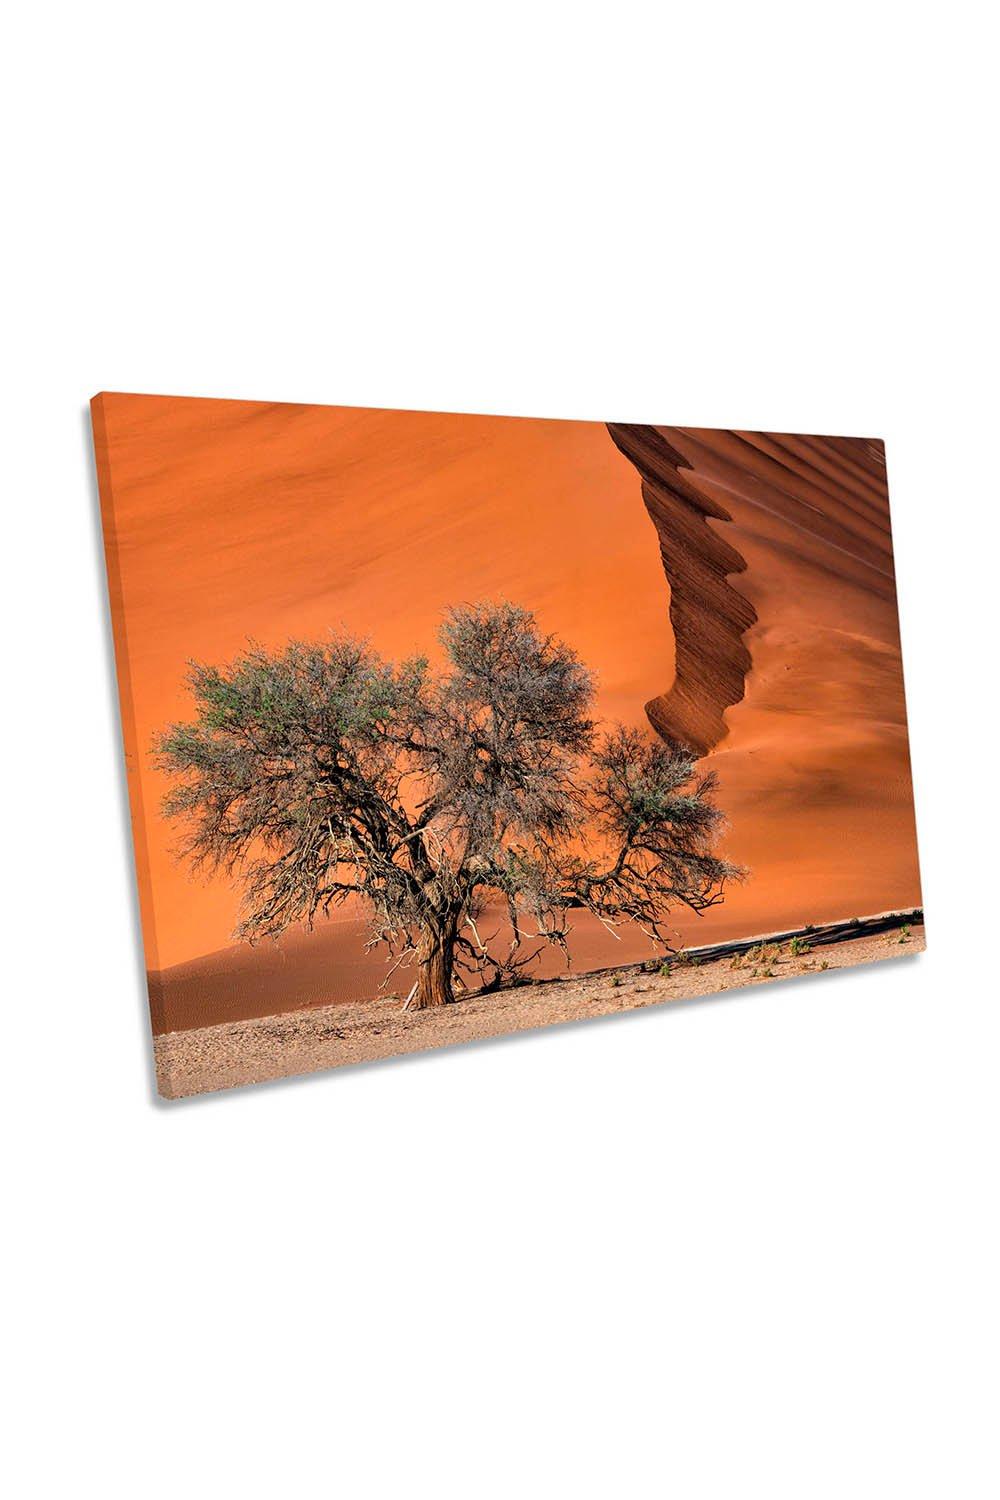 Acacia Tree in the Desert Sand Dune Canvas Wall Art Picture Print